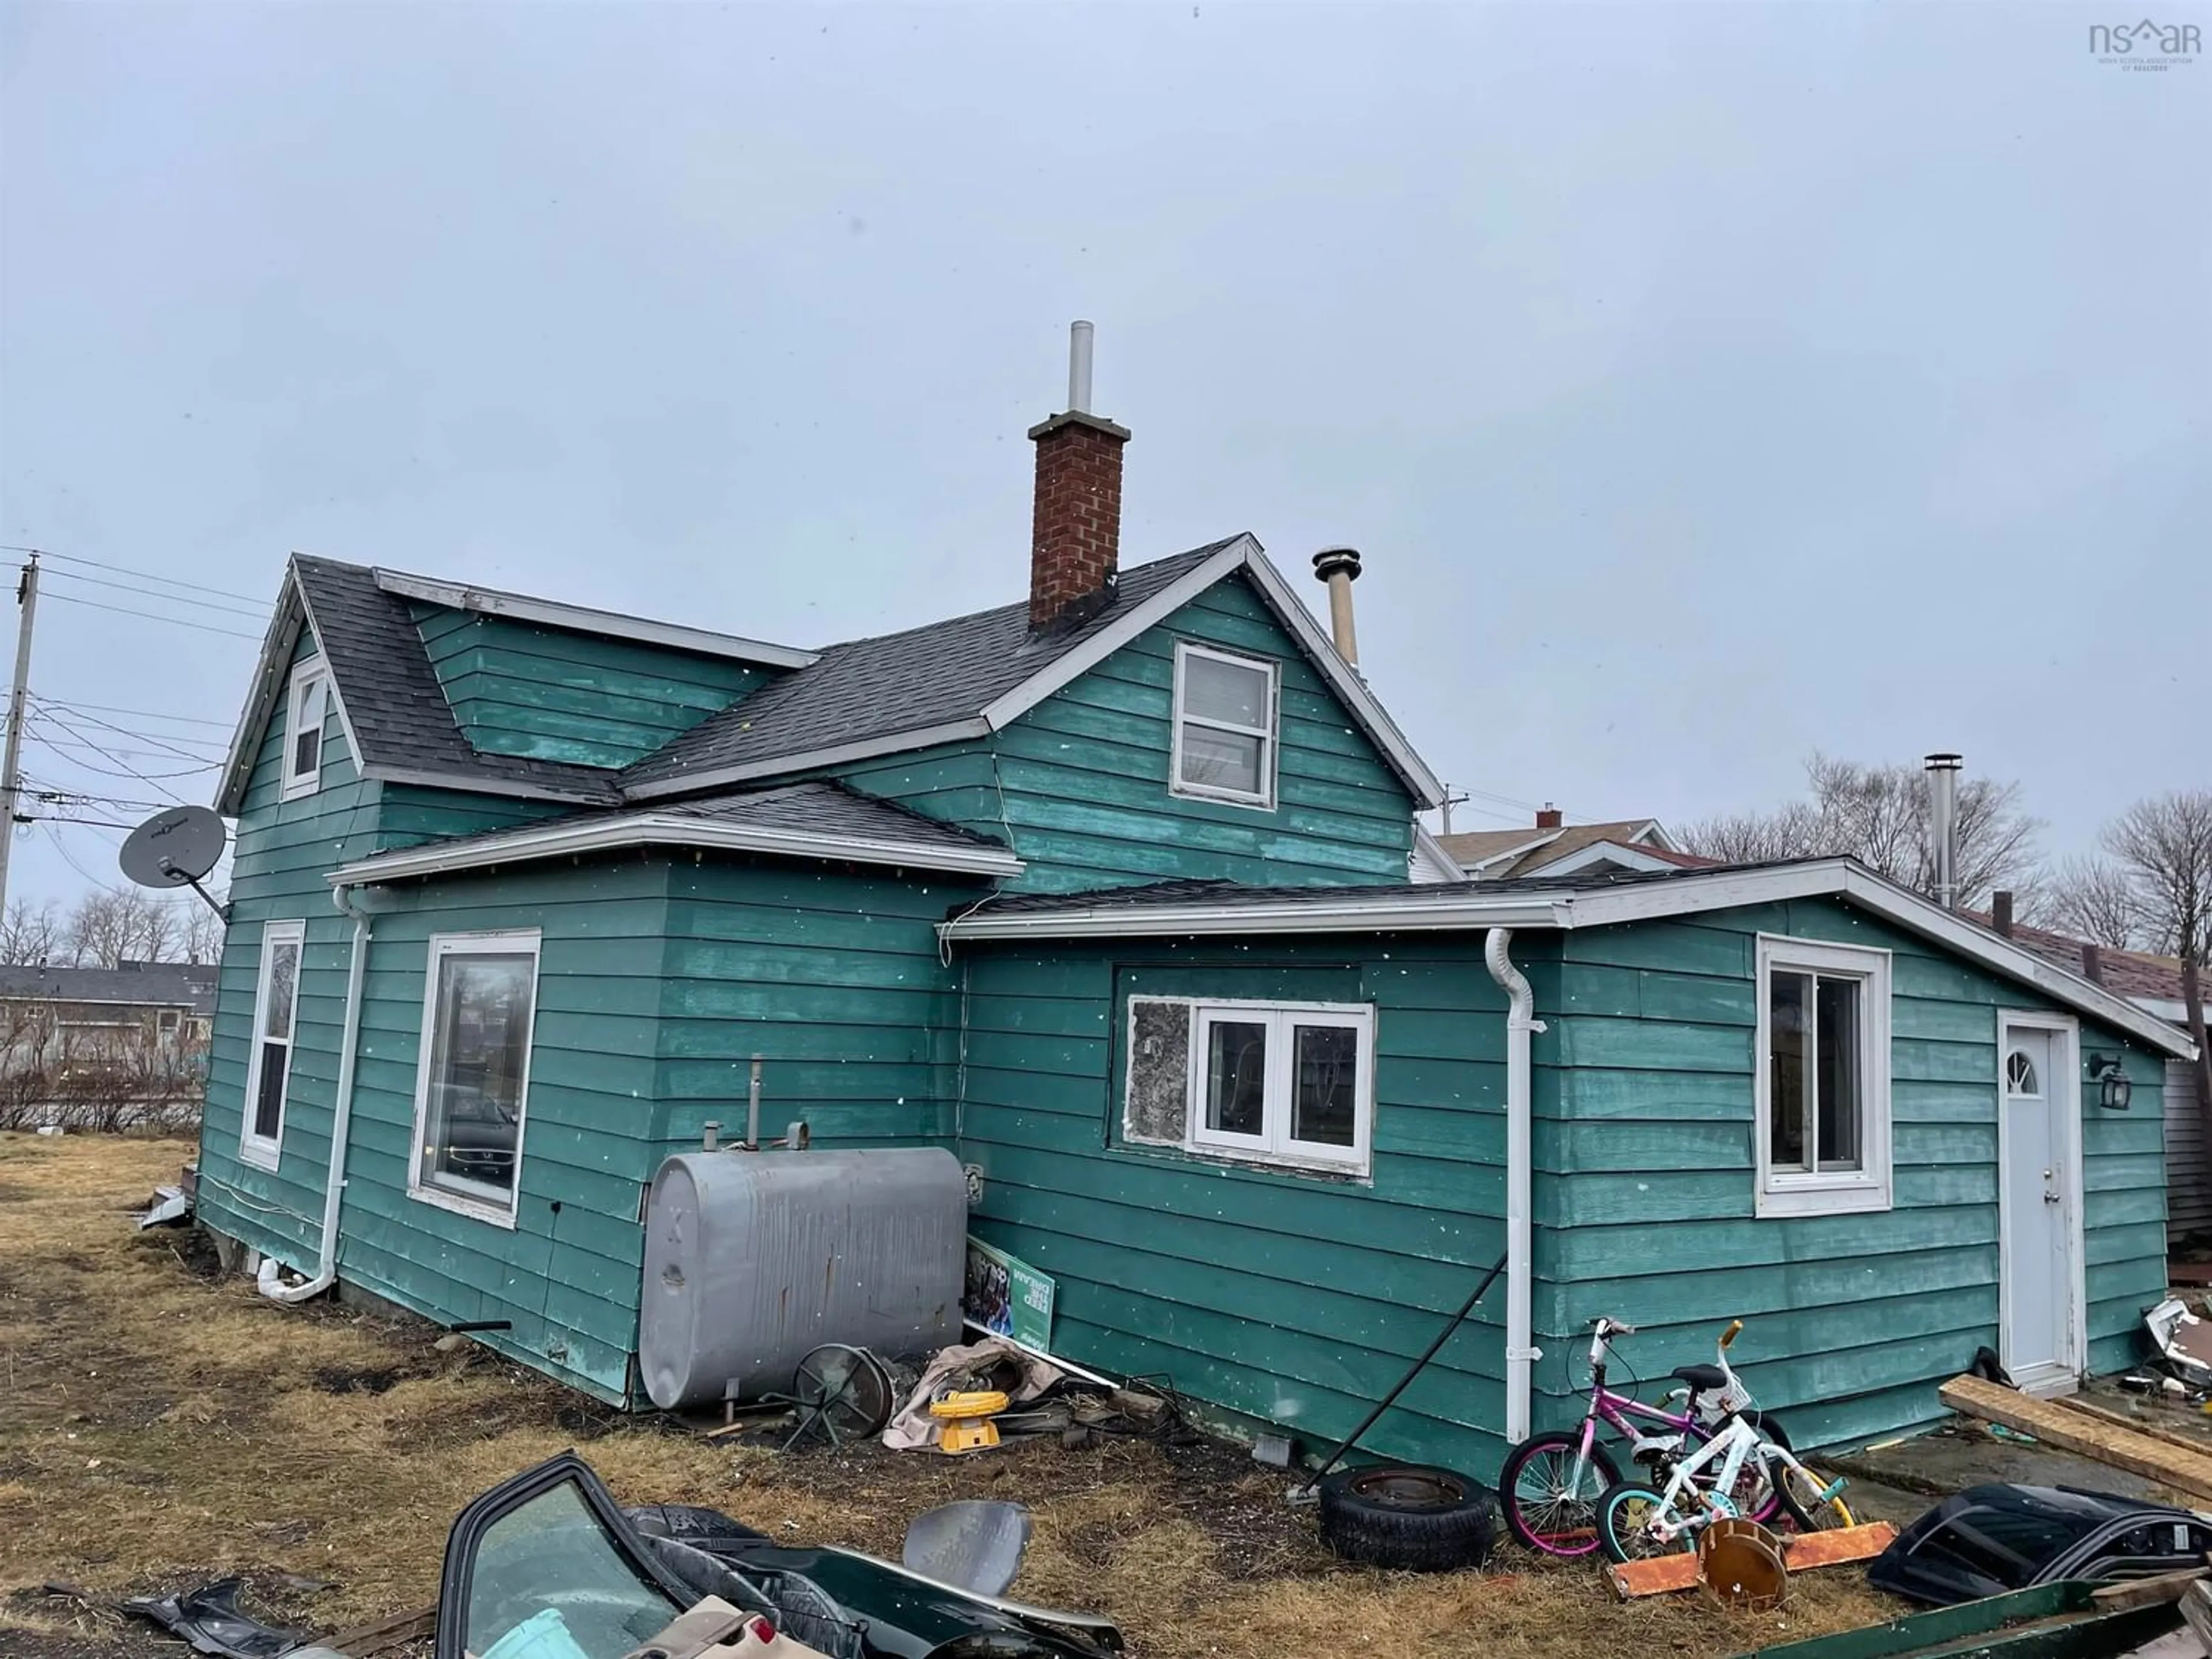 Frontside or backside of a home for 958 May St, Scotchtown Nova Scotia B1H 1E4